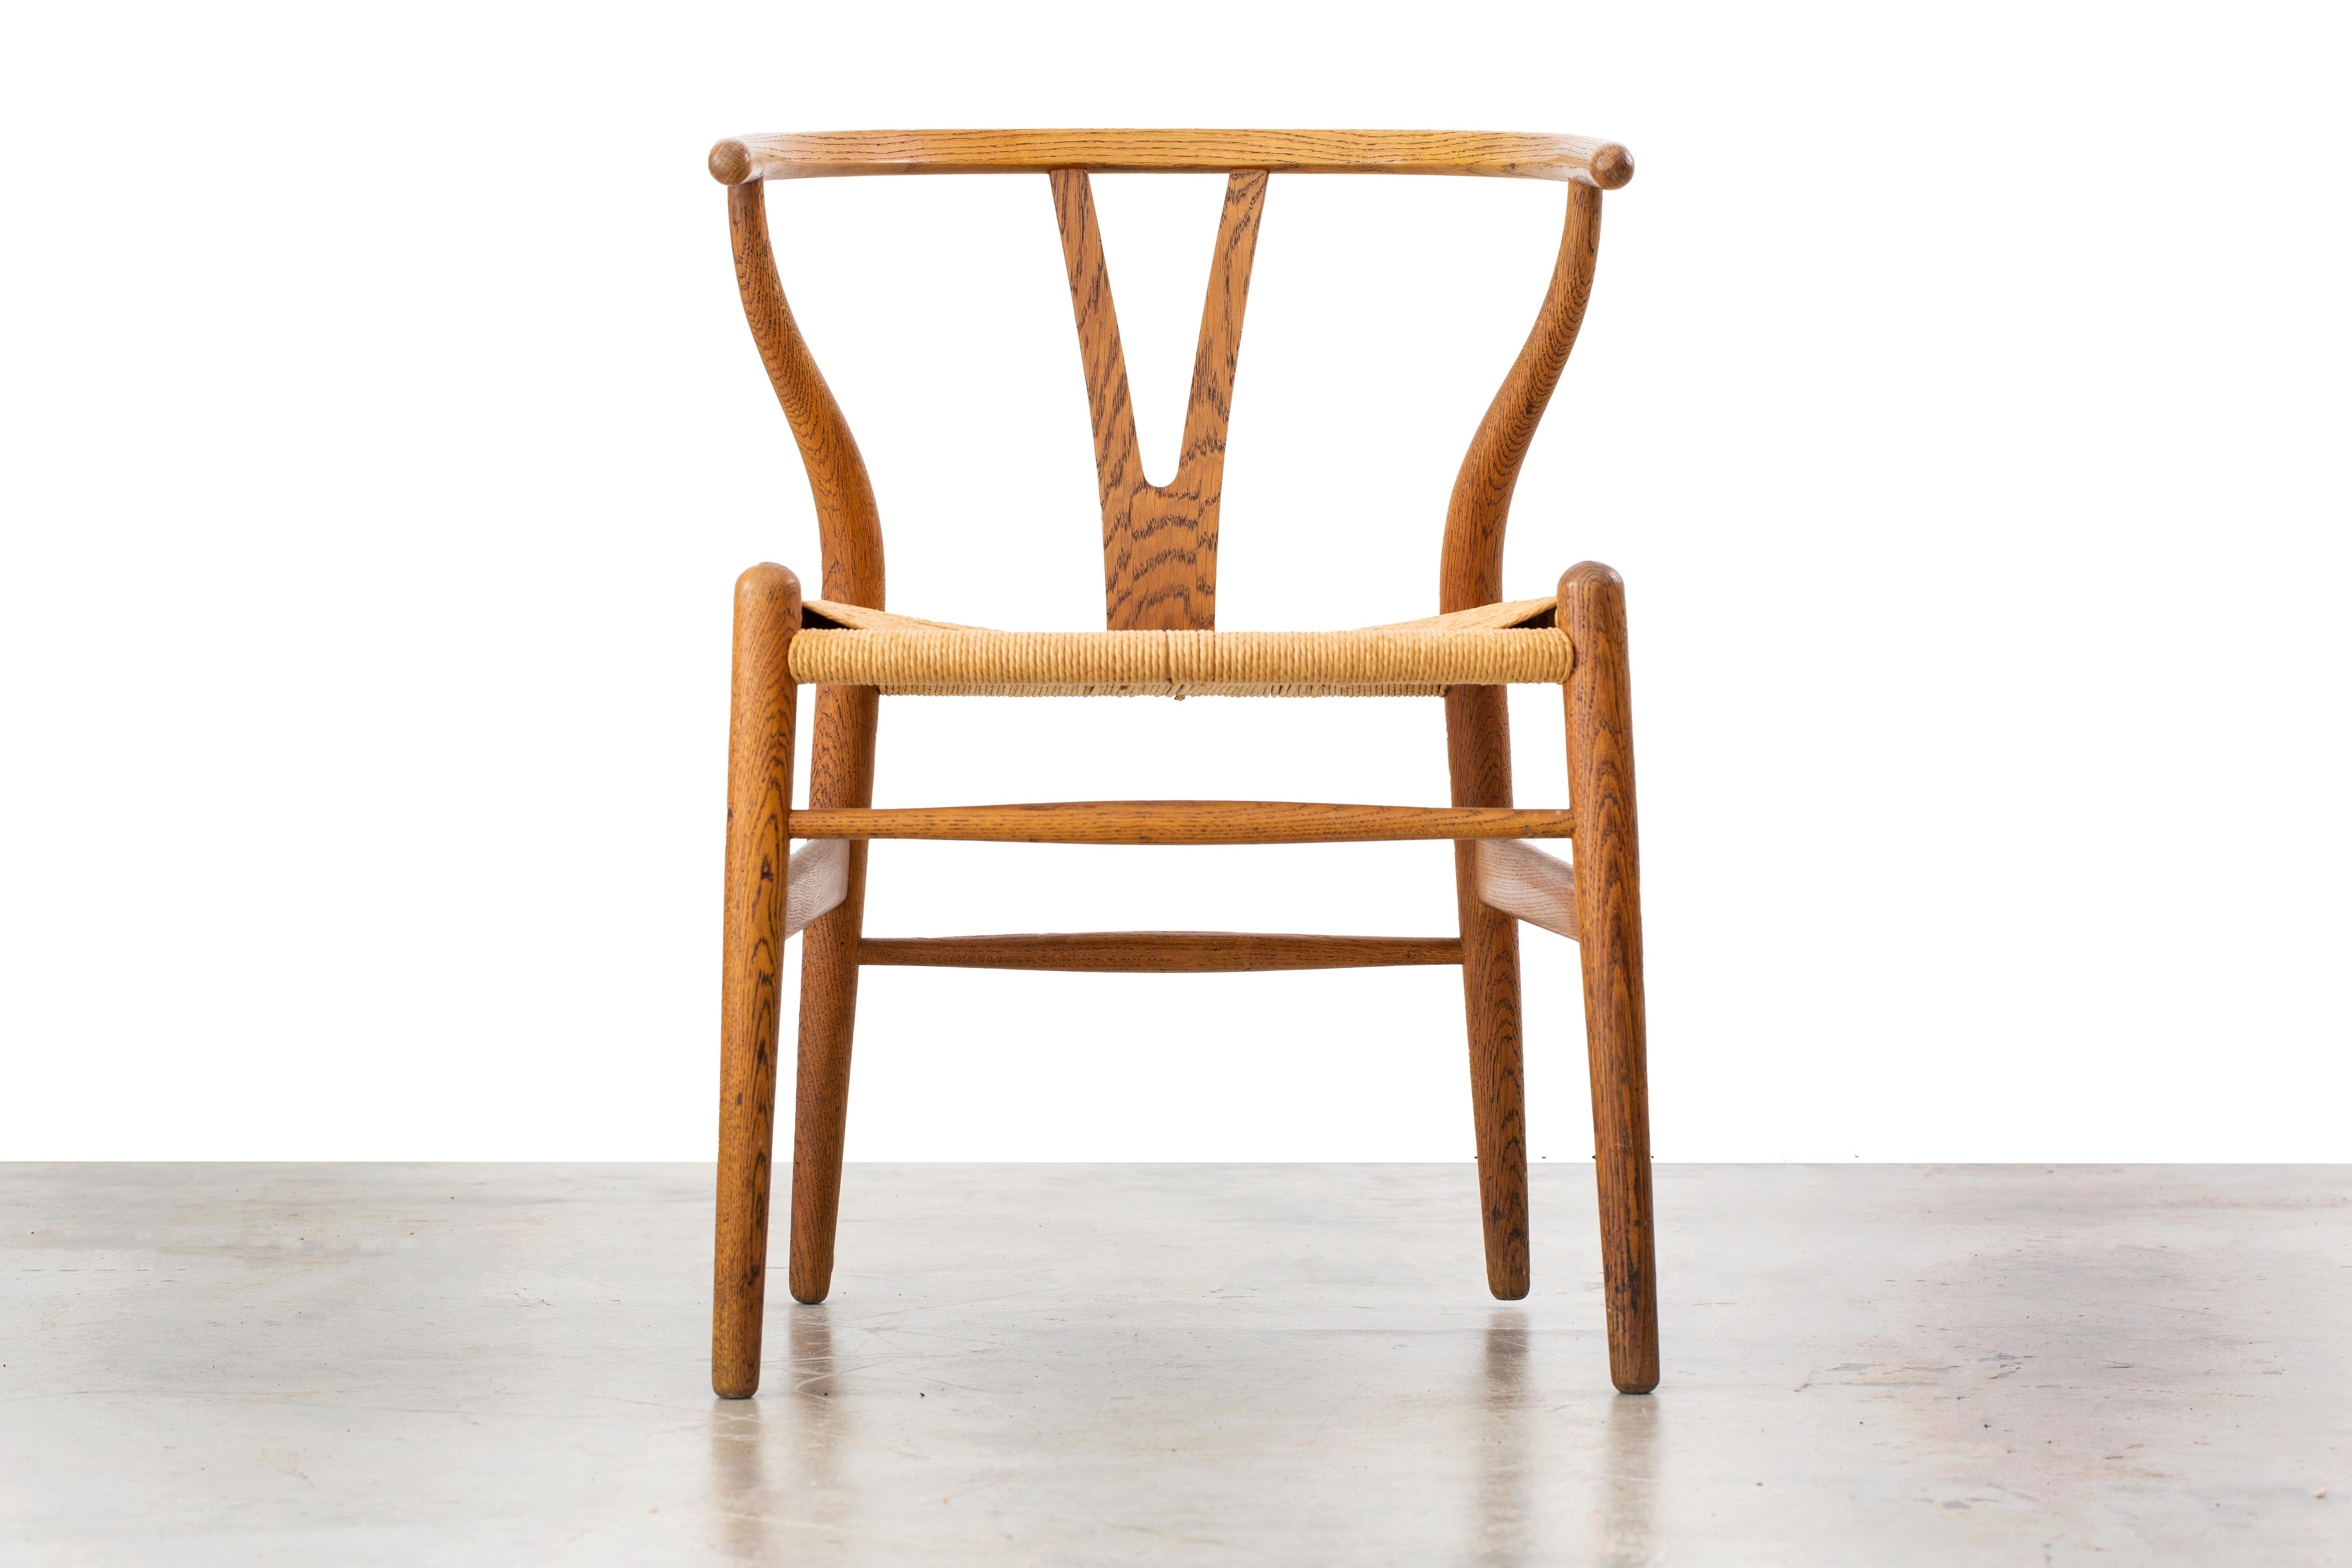 The Iconic wishbone chair, model number CH24, designed by Hans Wegner and imported by Illums Bolighus. This example is a time capsule piece, with original oak and paper cord seat all in fantastic condition. This chair would work well alongside works